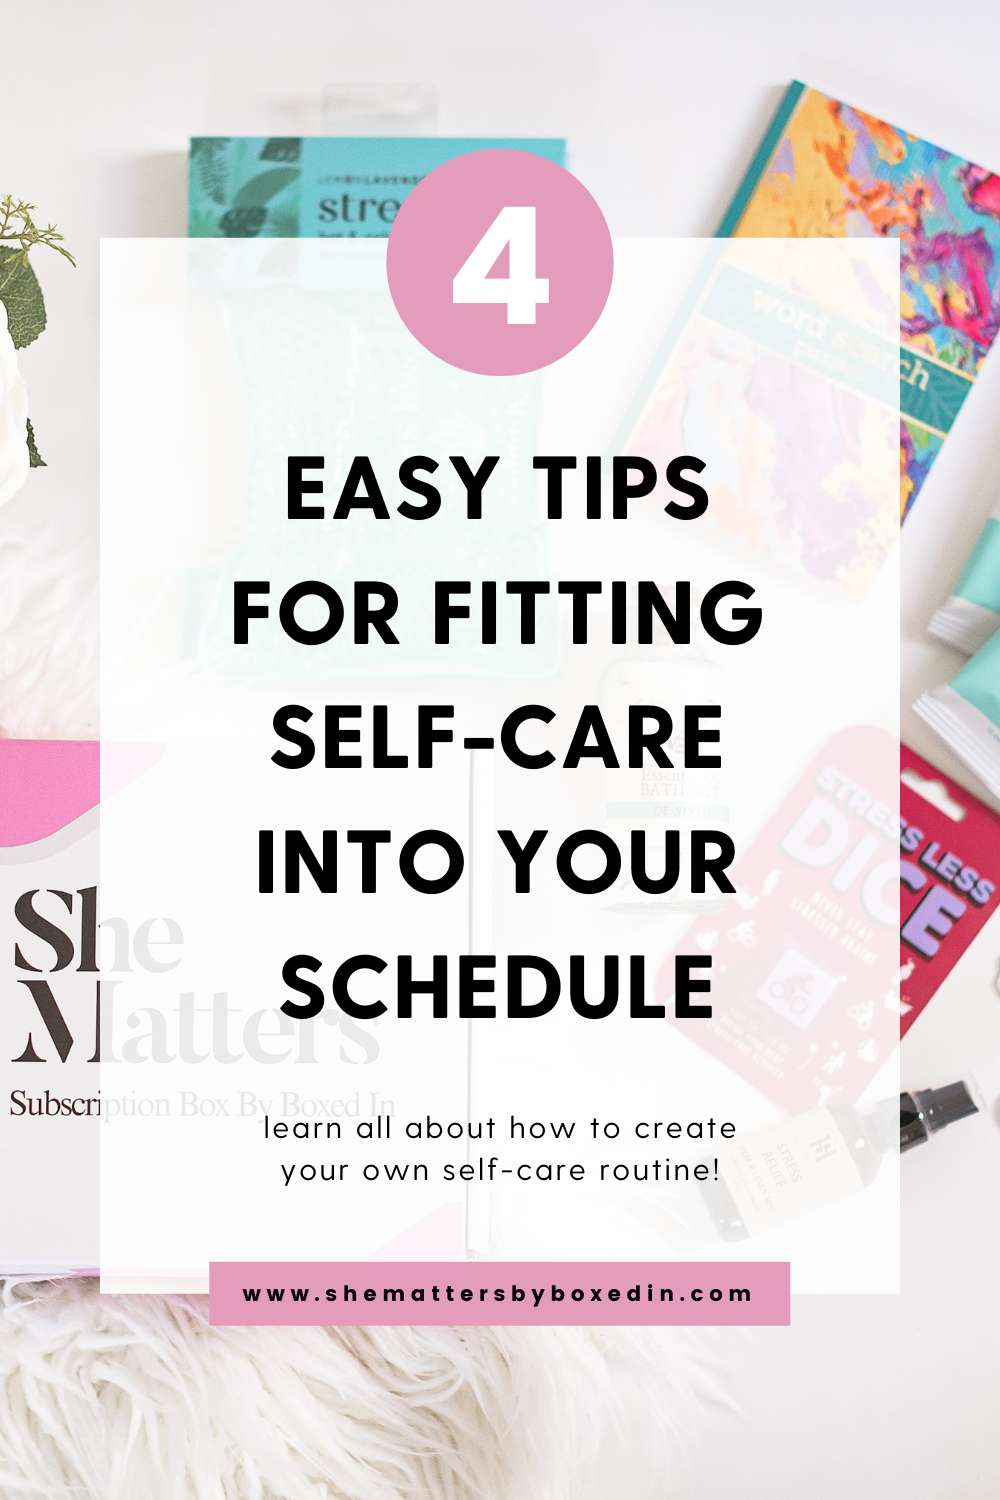 Easy Tips For Fitting Self-Care Into Your Schedule